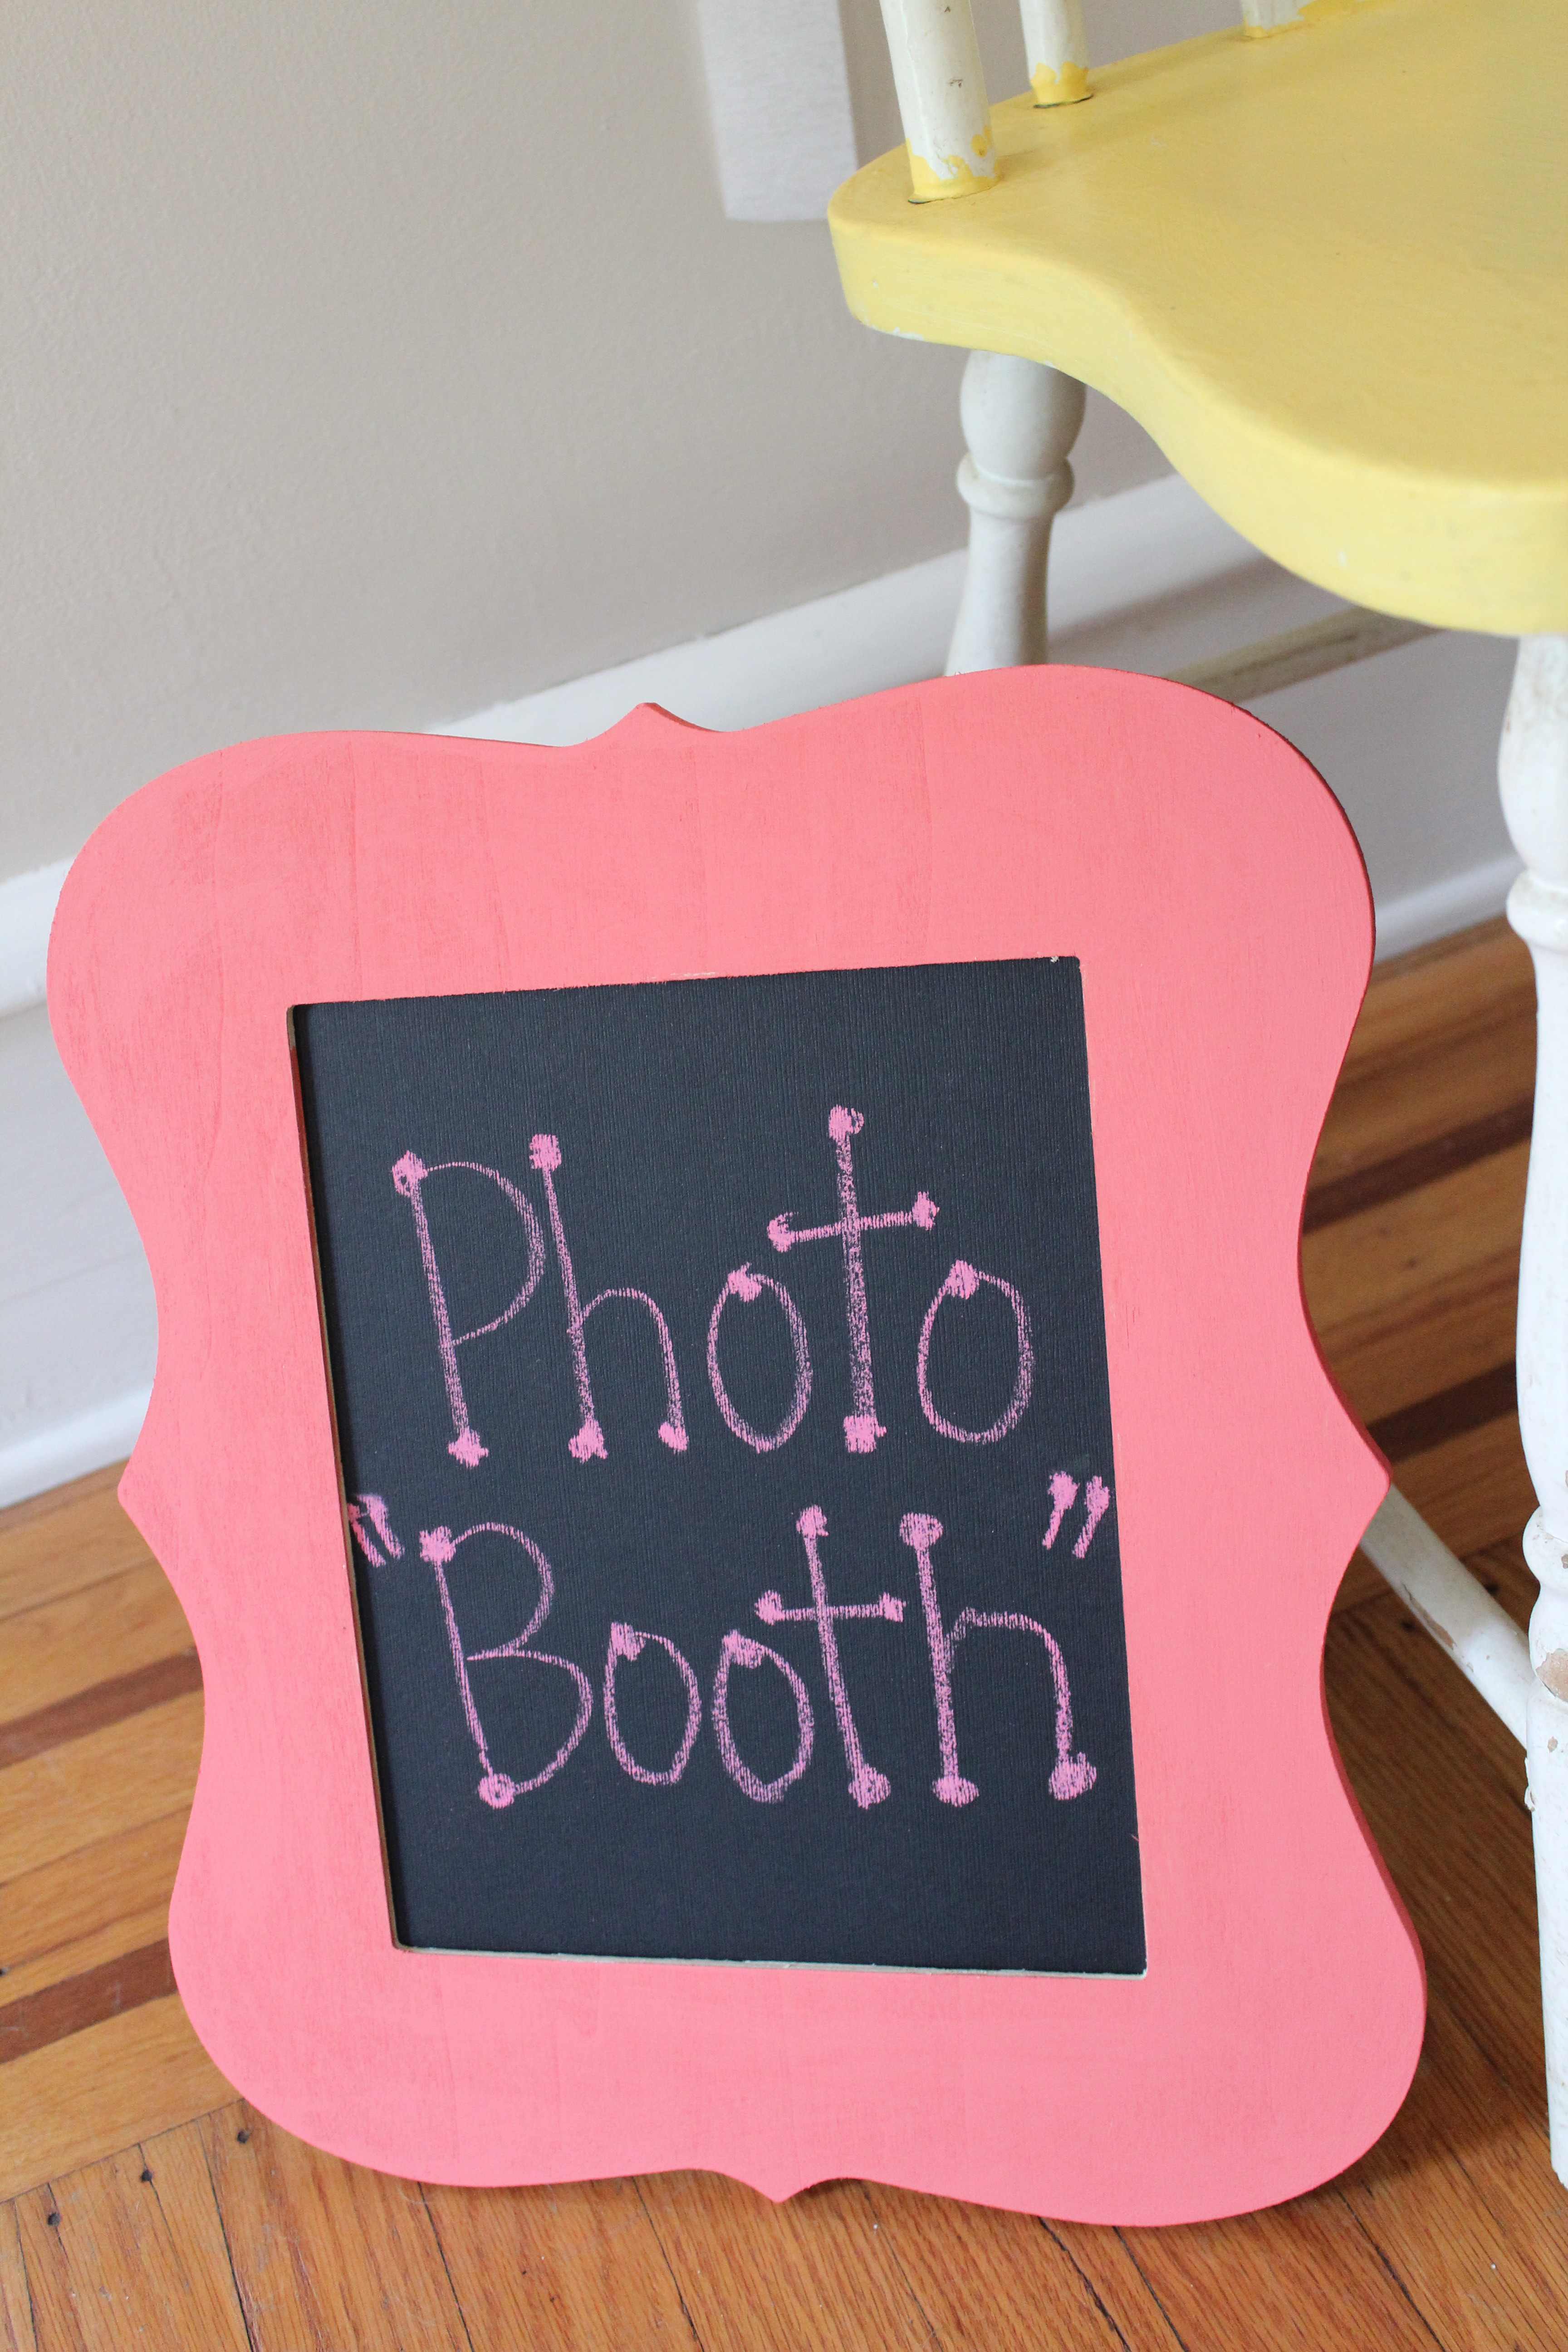 Themeless Birthday Party Photo Booth